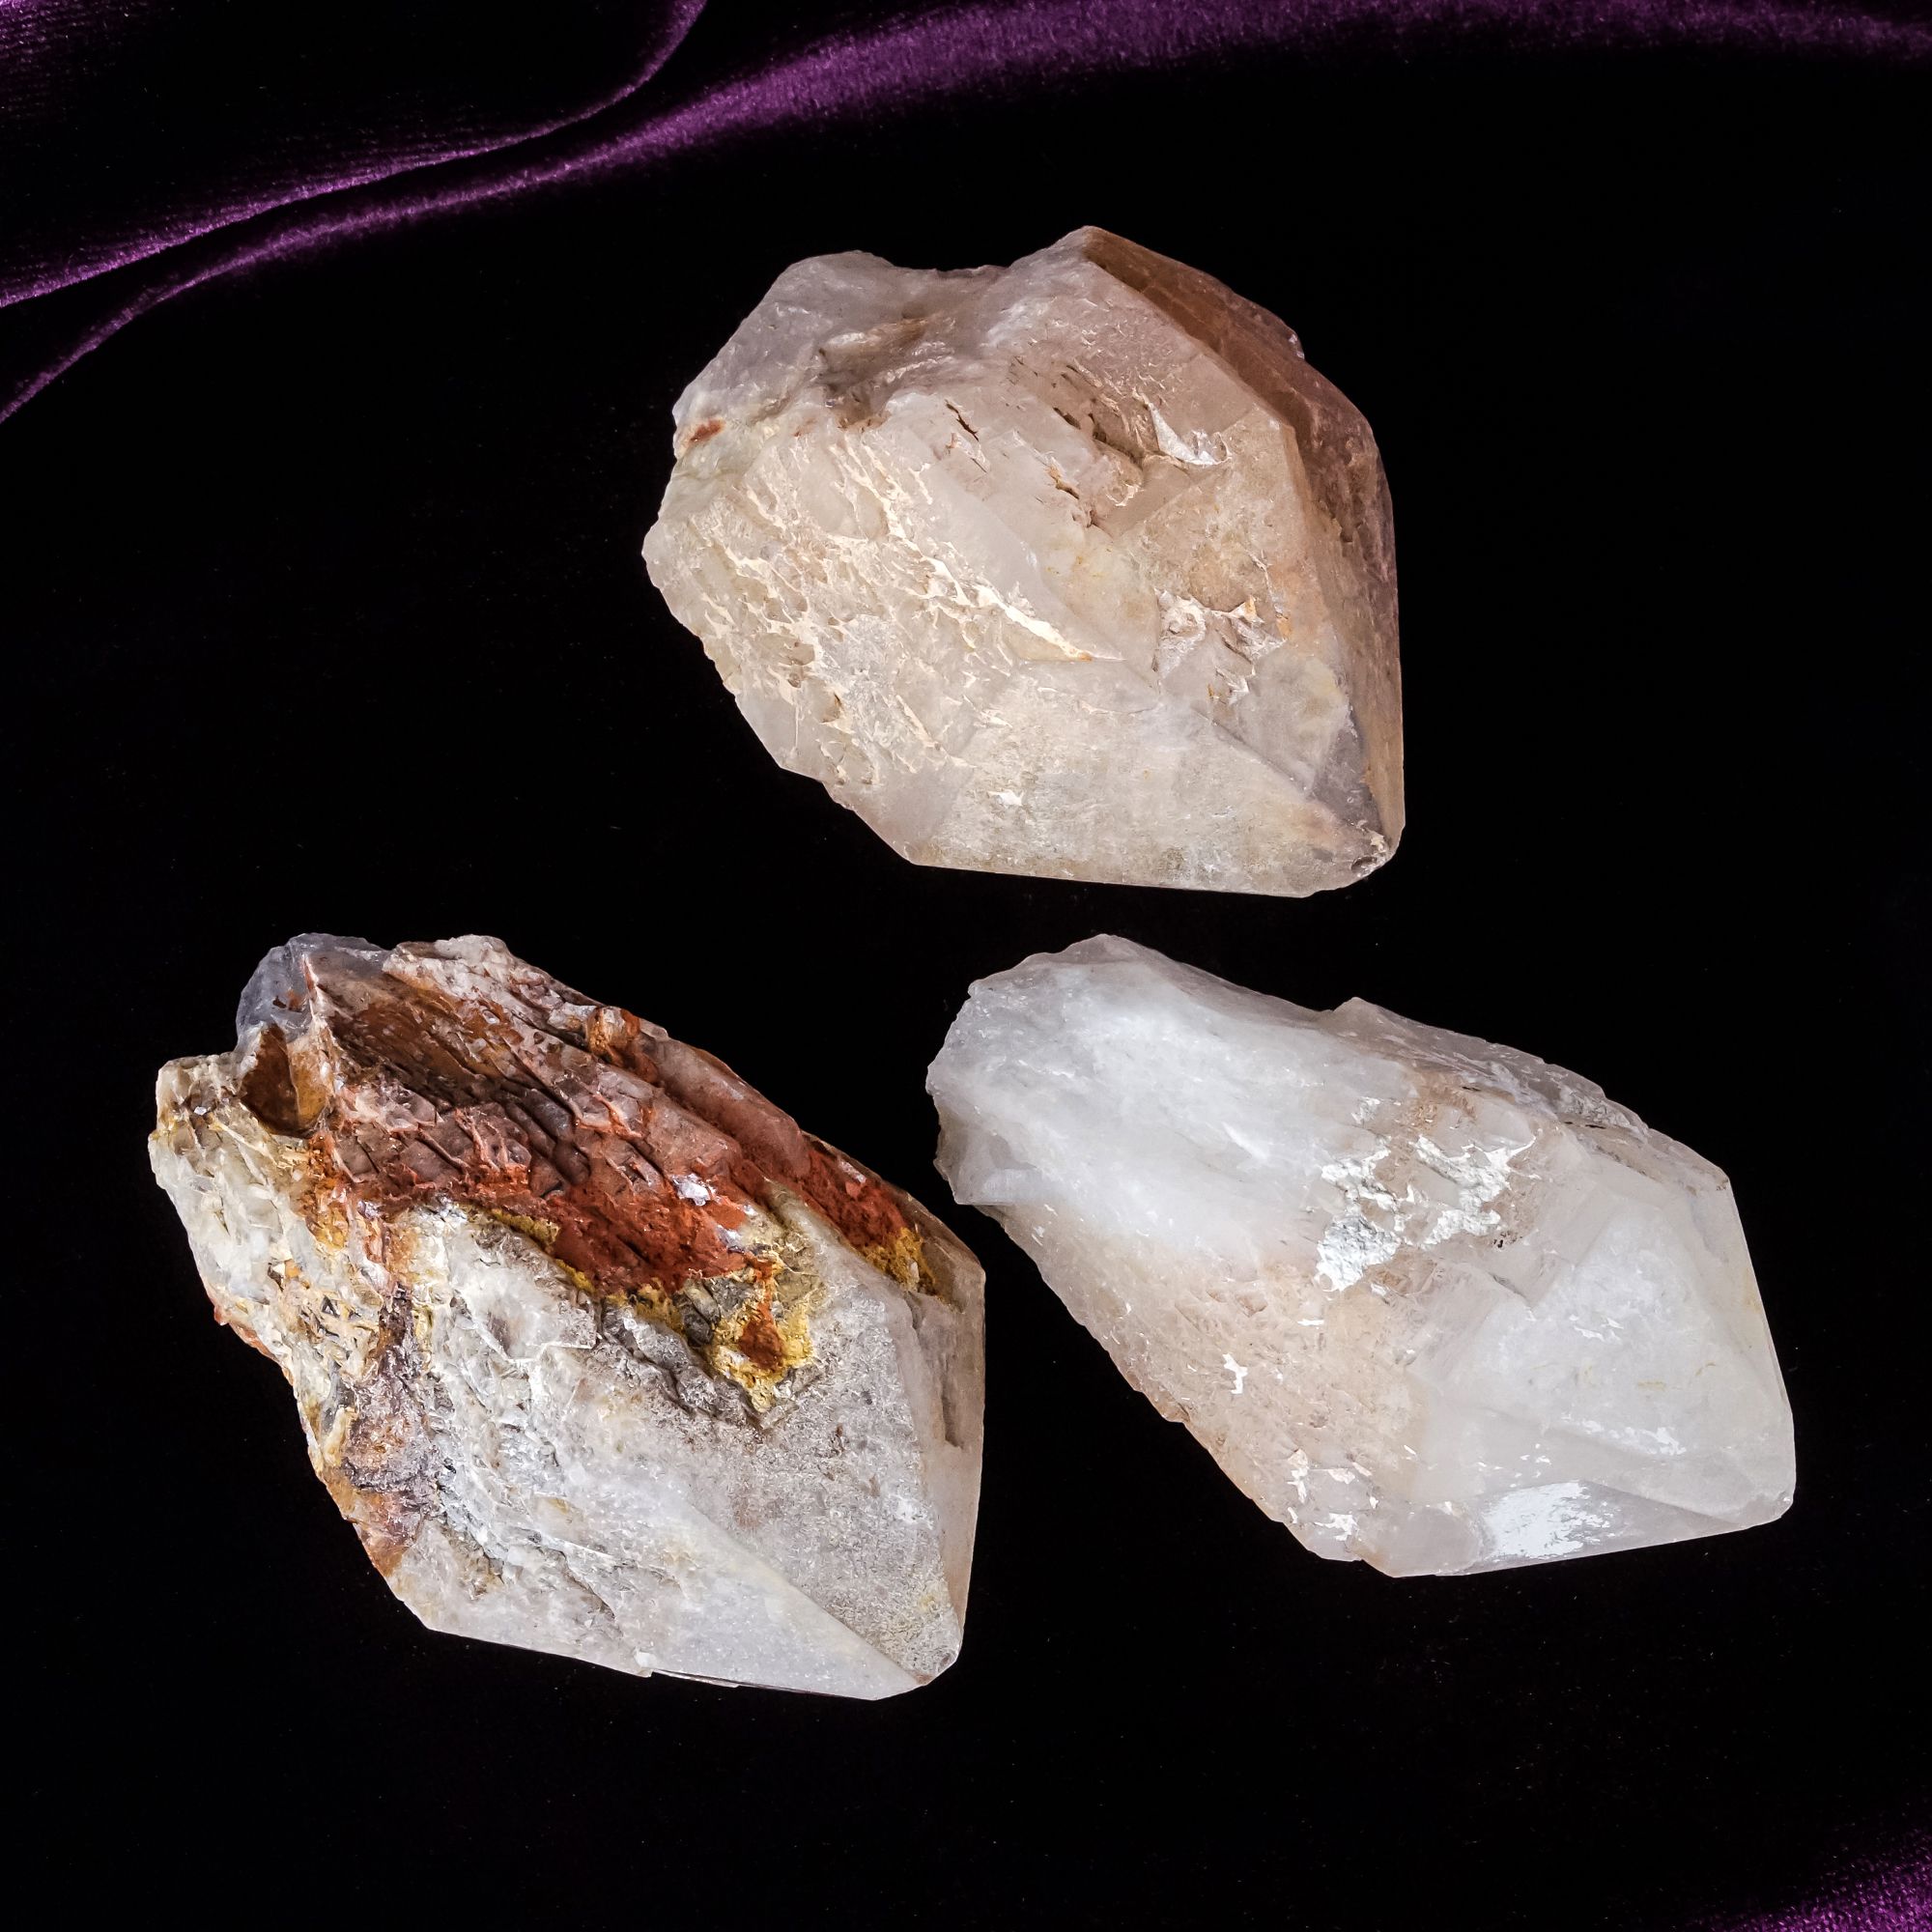 Pineapple Quartz Crystals for healing and divination